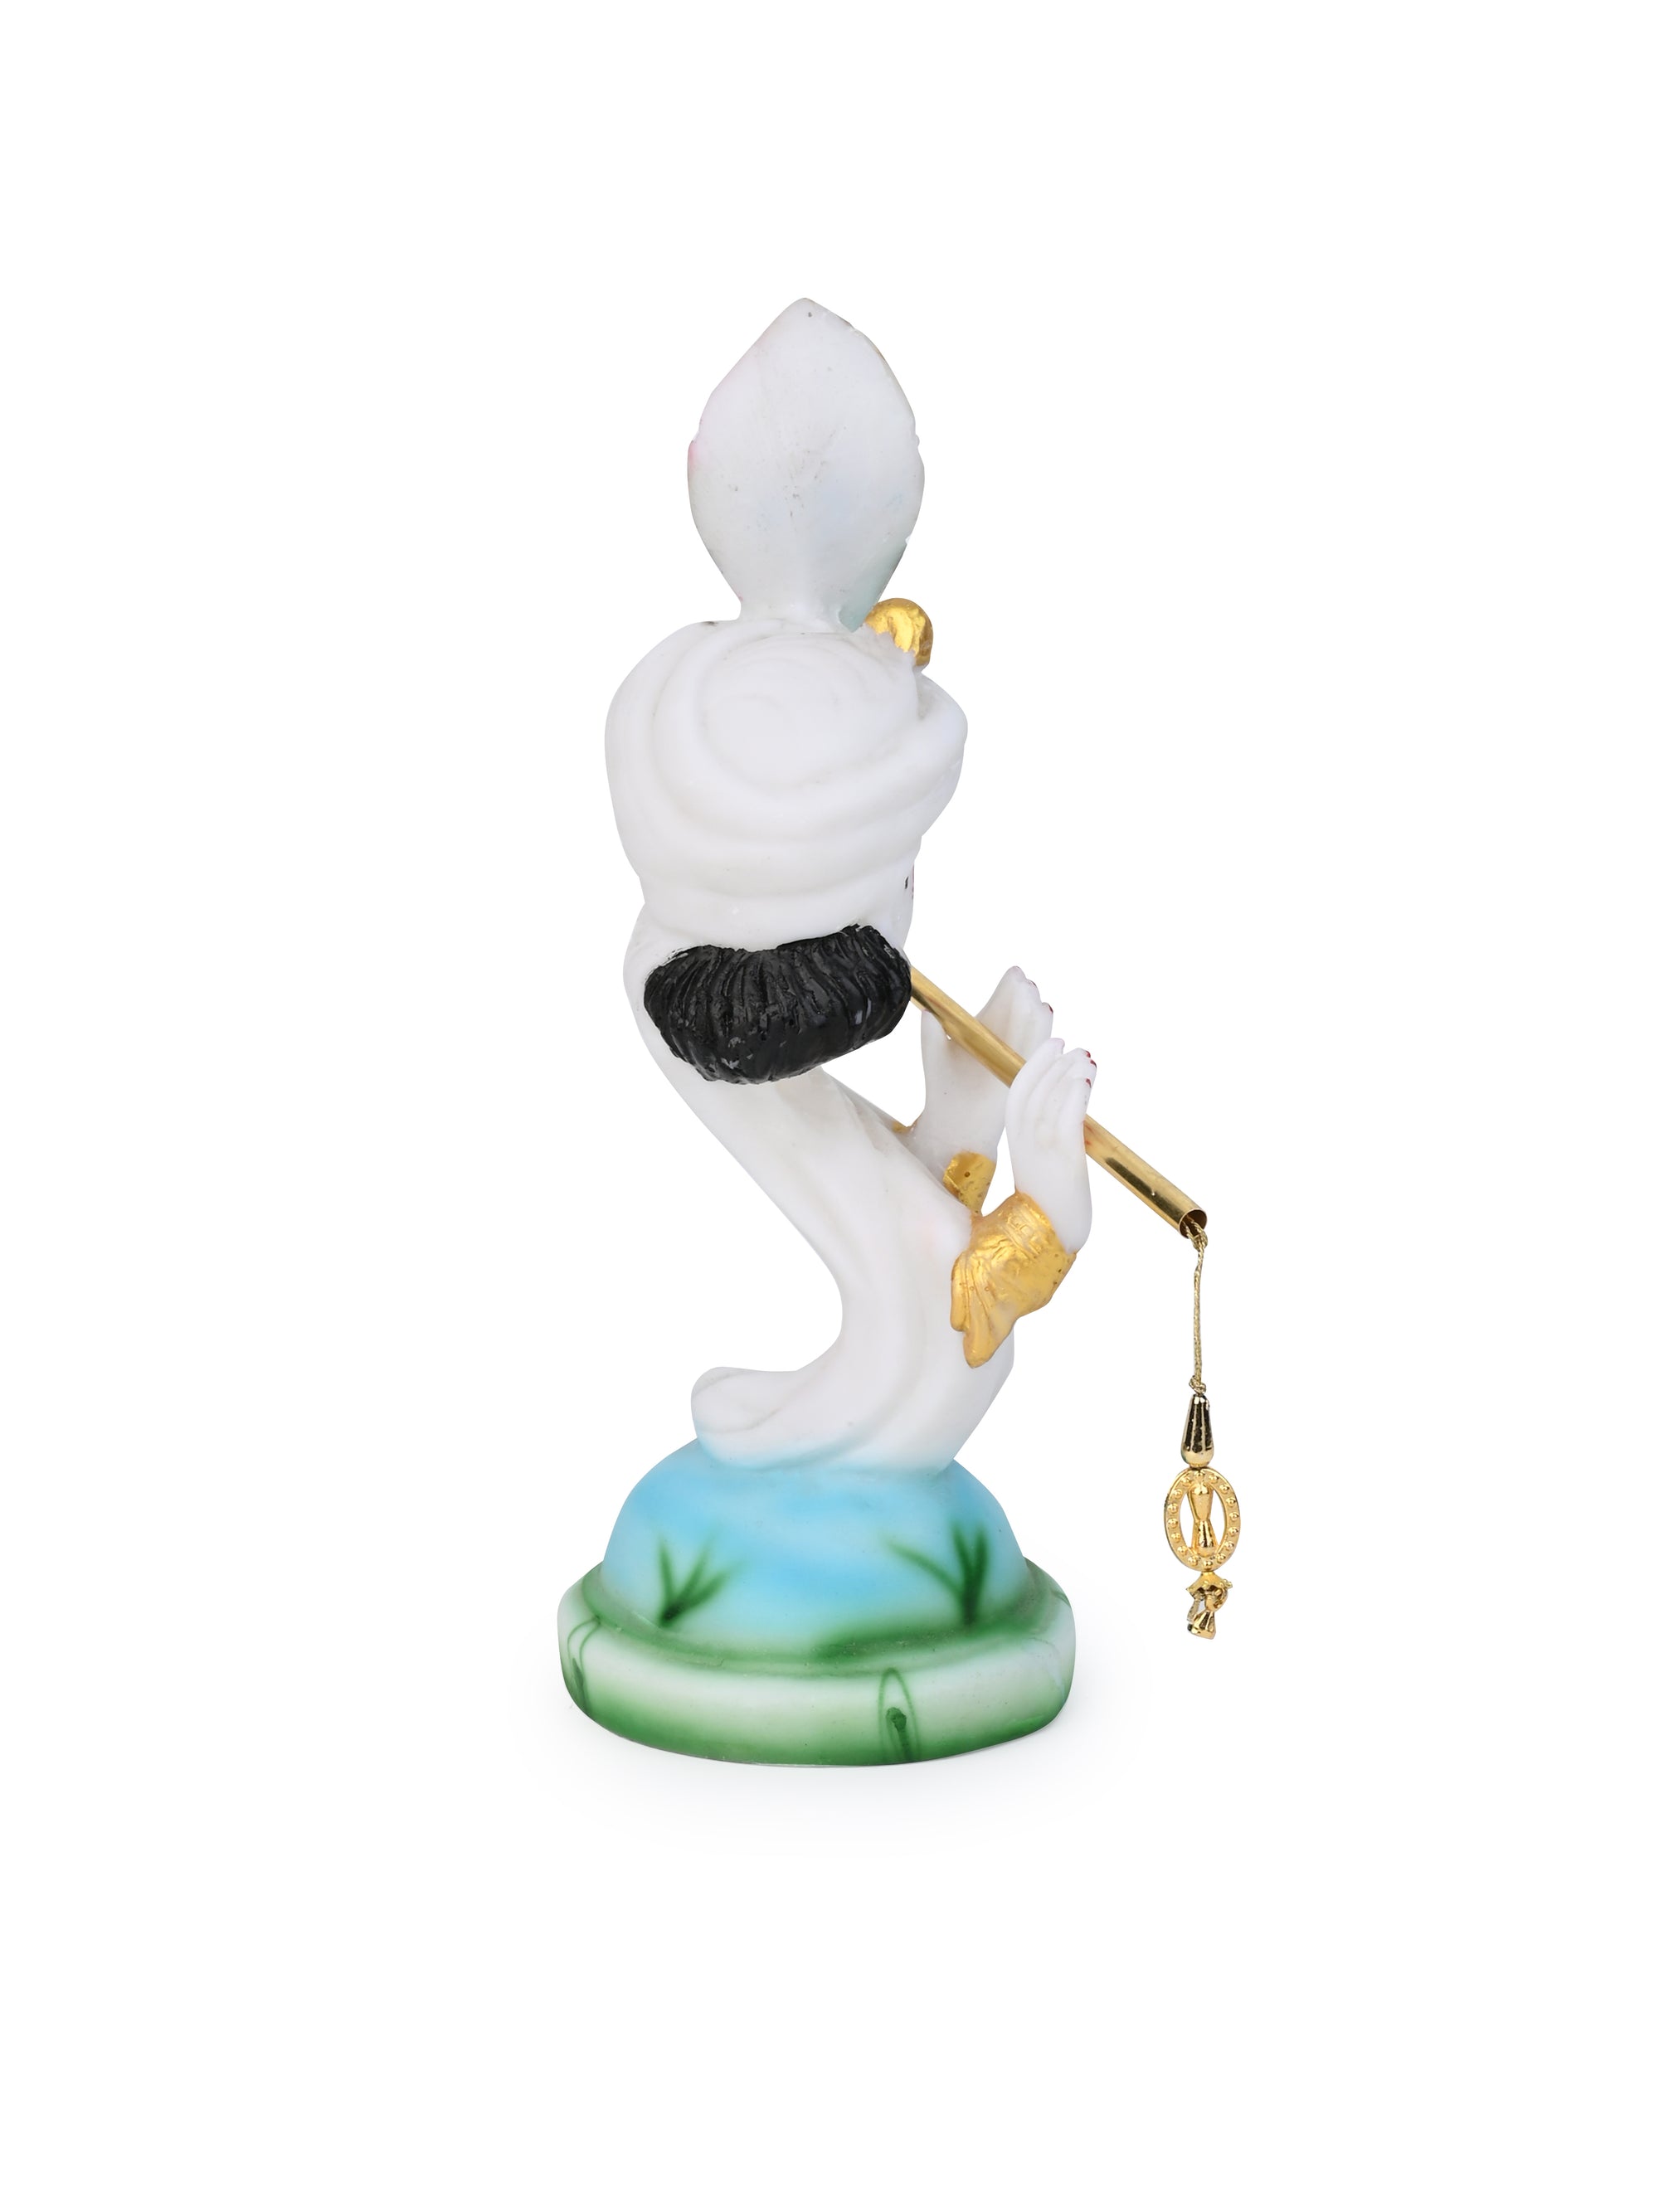 White and Blue Resin Crafted Modern Design Lord Krishna Statue - 12 inches